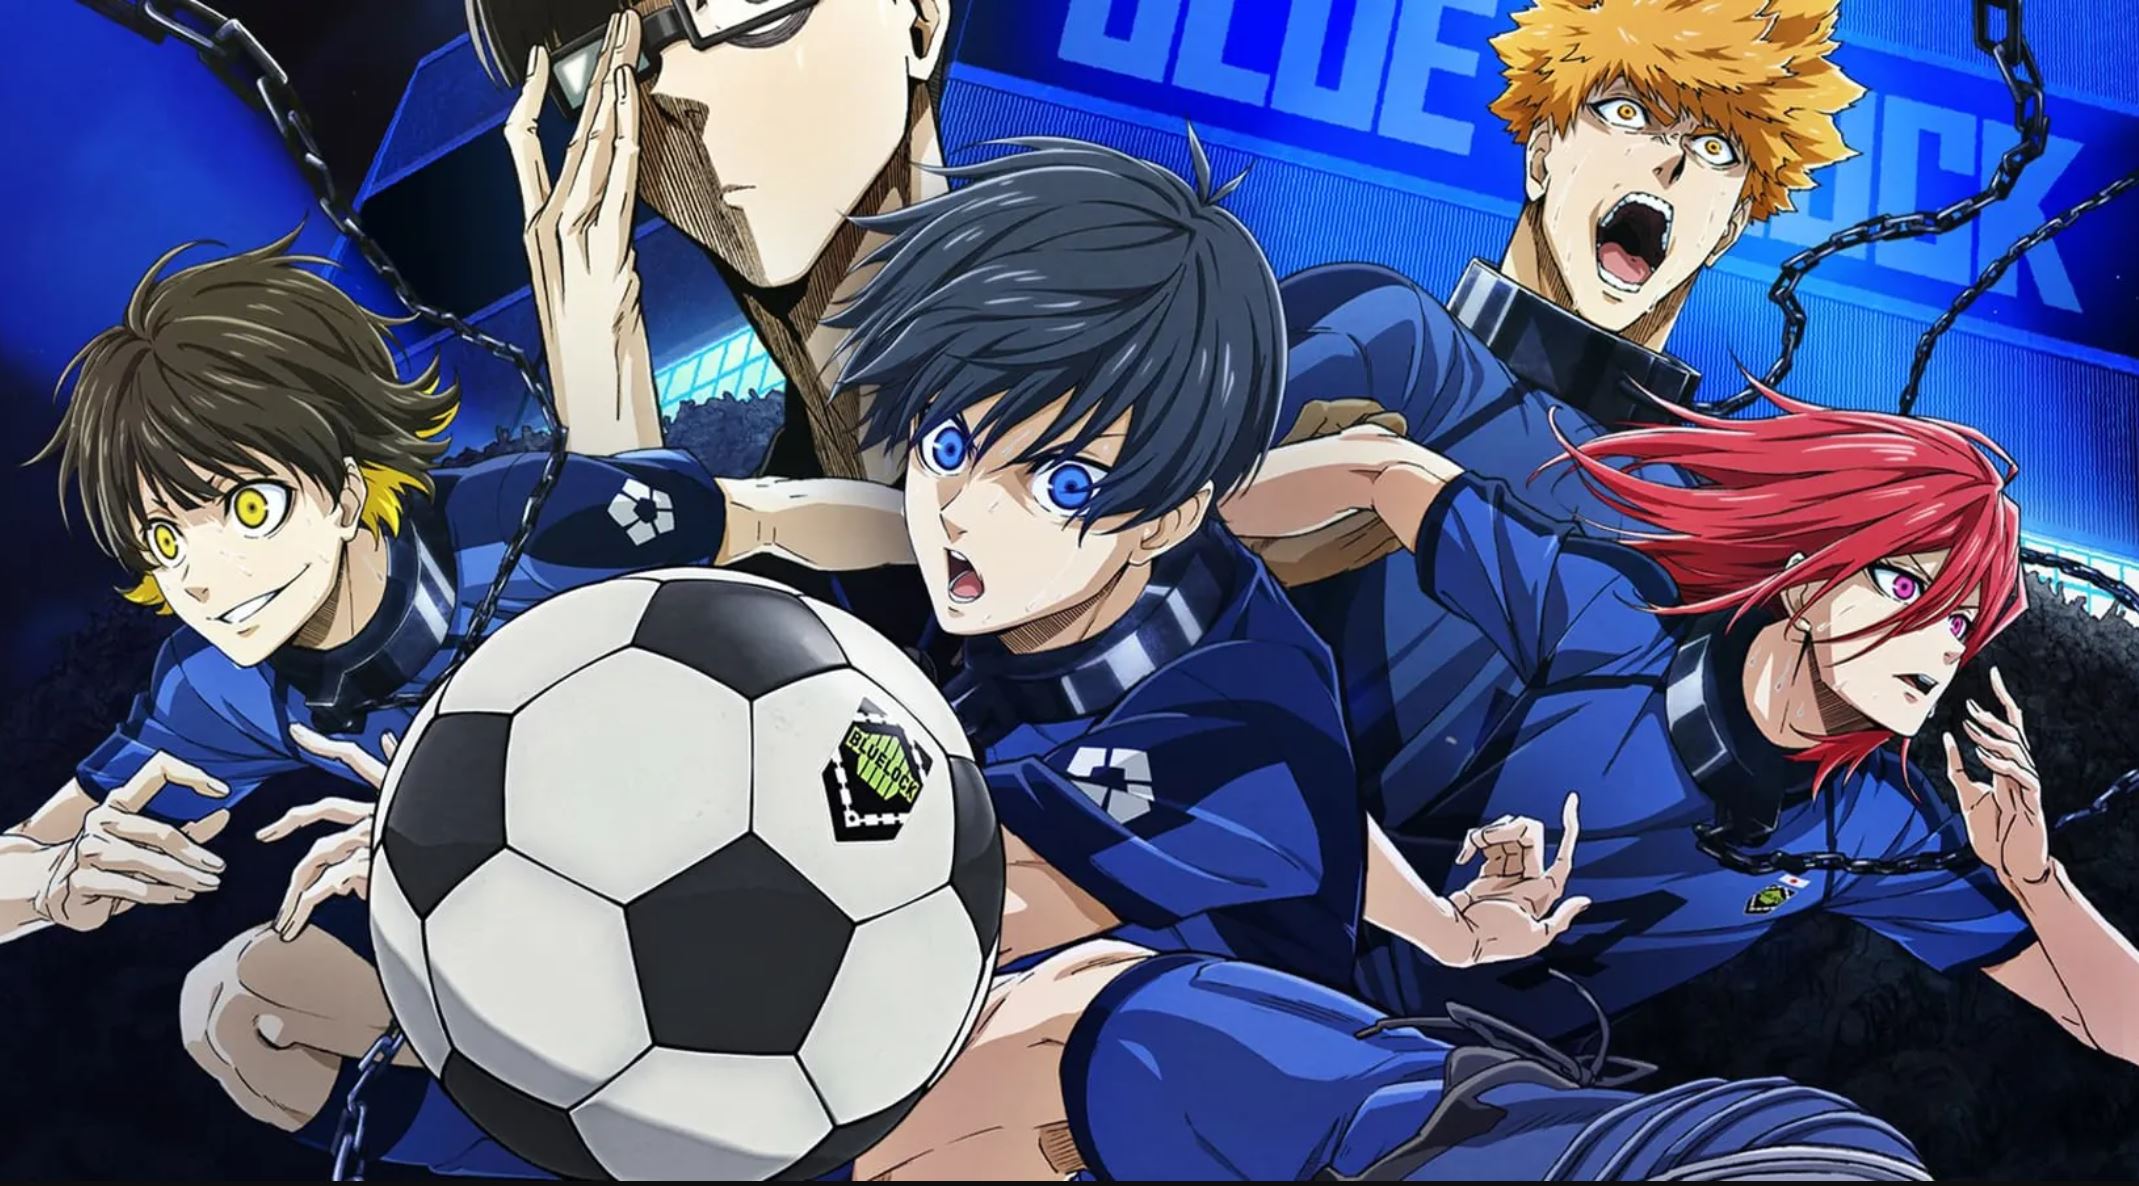 Blue Lock Episode 1 Review Soccer Meets Squid Game